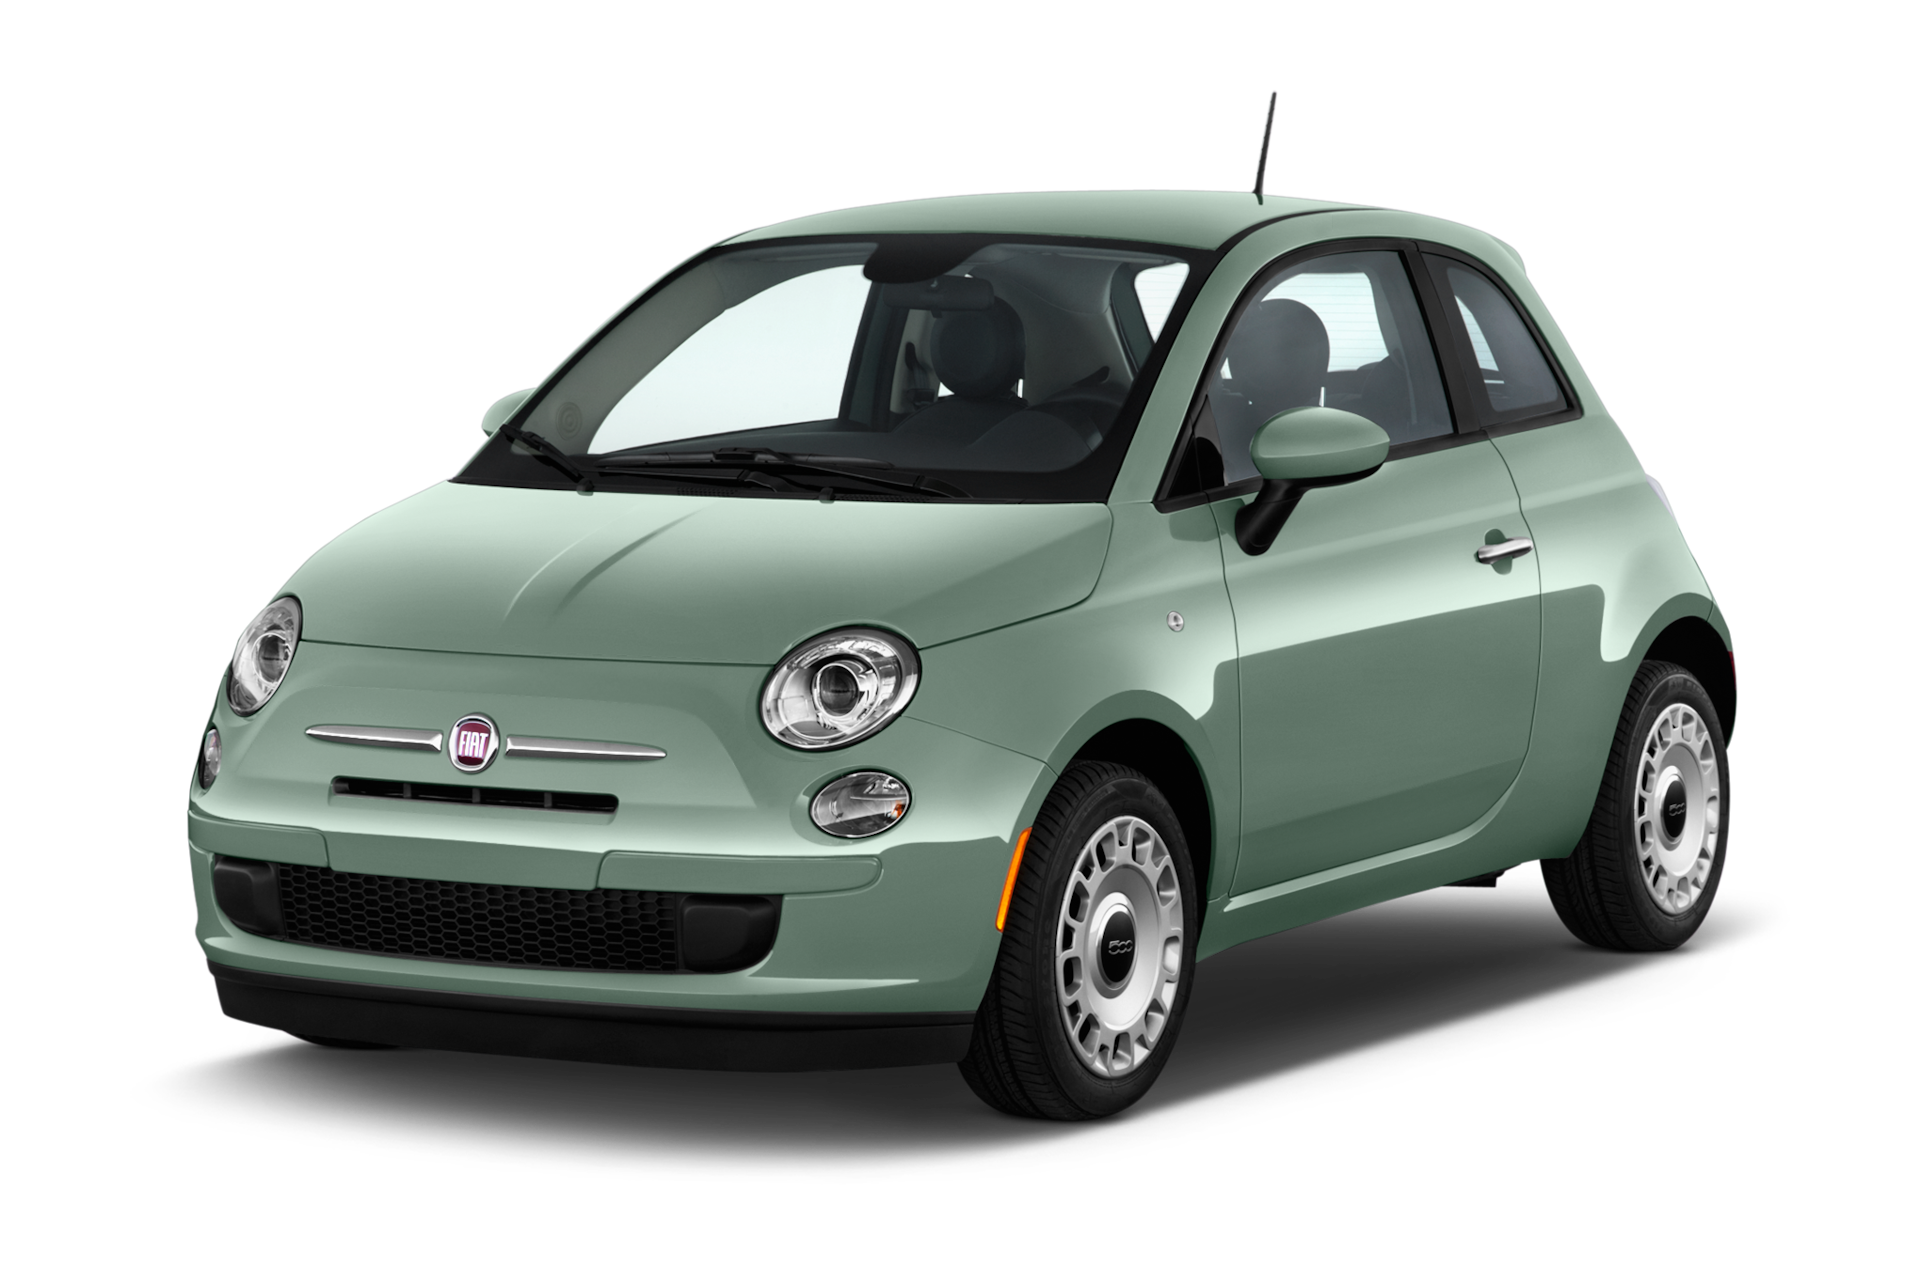 2015 FIAT 500 Prices, Reviews, and Photos - MotorTrend